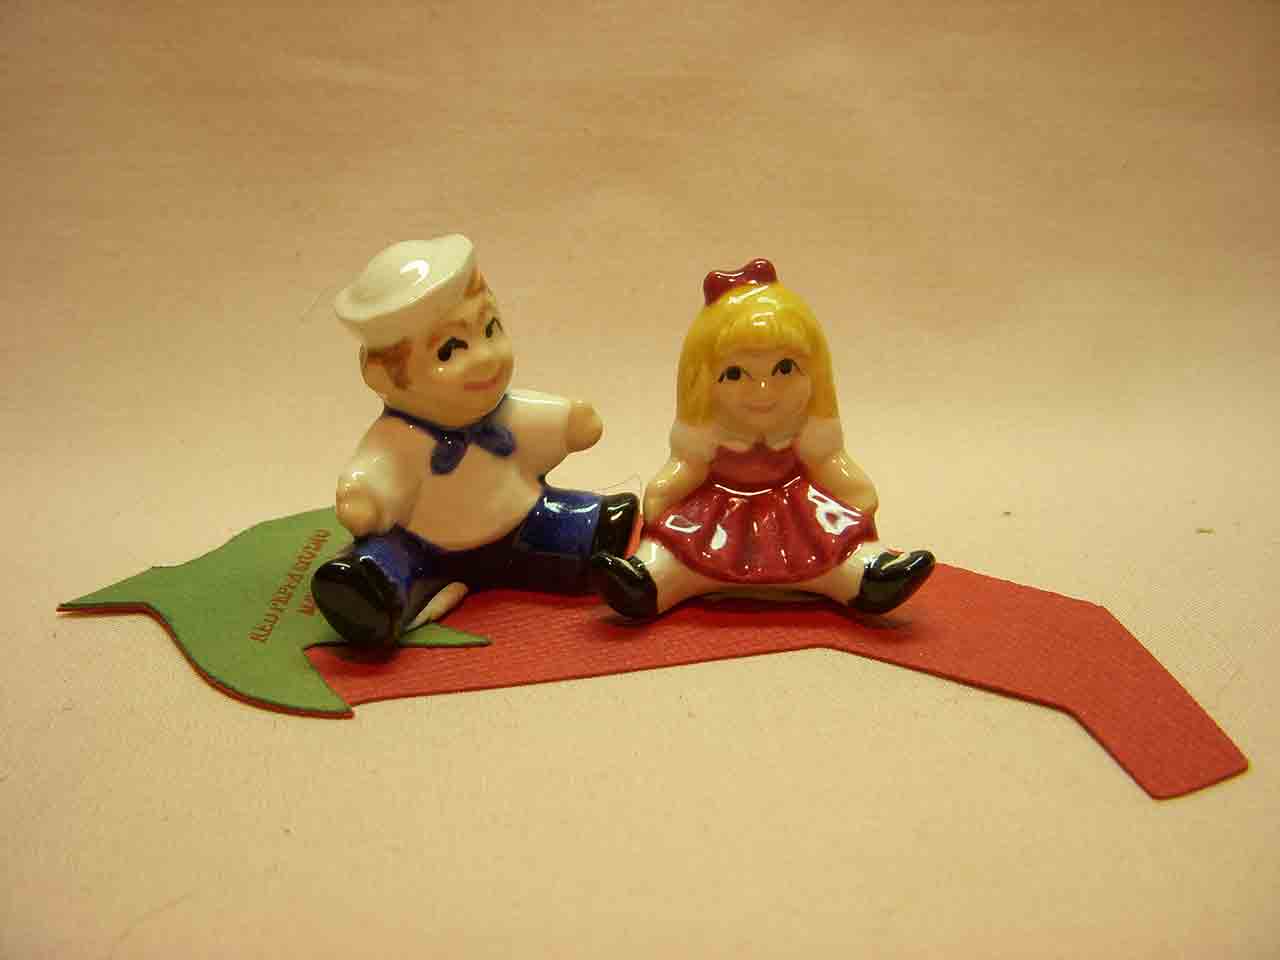 Mini sailor and girl salt and pepper shaker by Red Peppa Studio